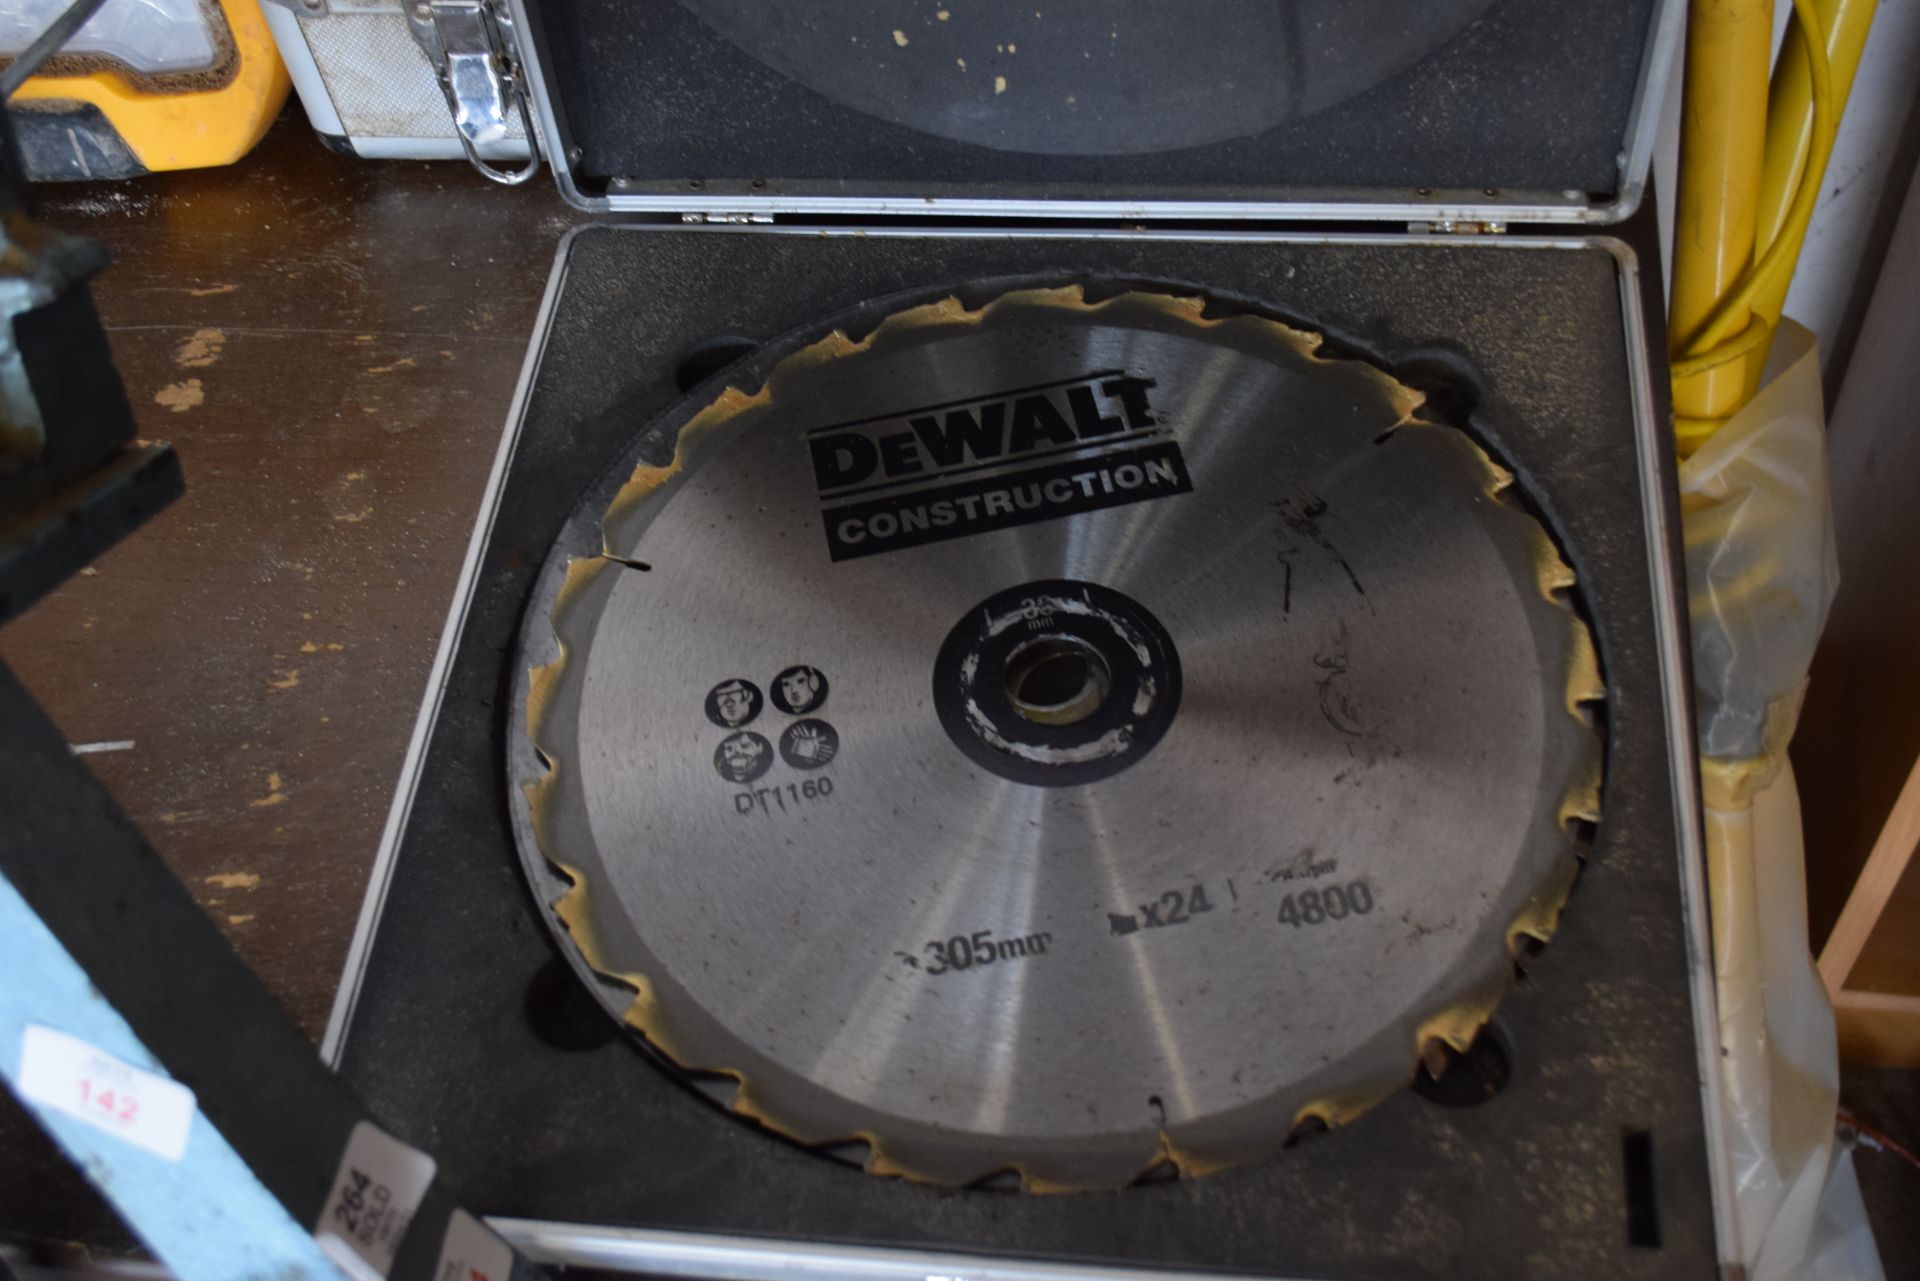 QUANTITY OF 350MM CUTTING BLADES IN A DE WALT CASE - Image 2 of 3